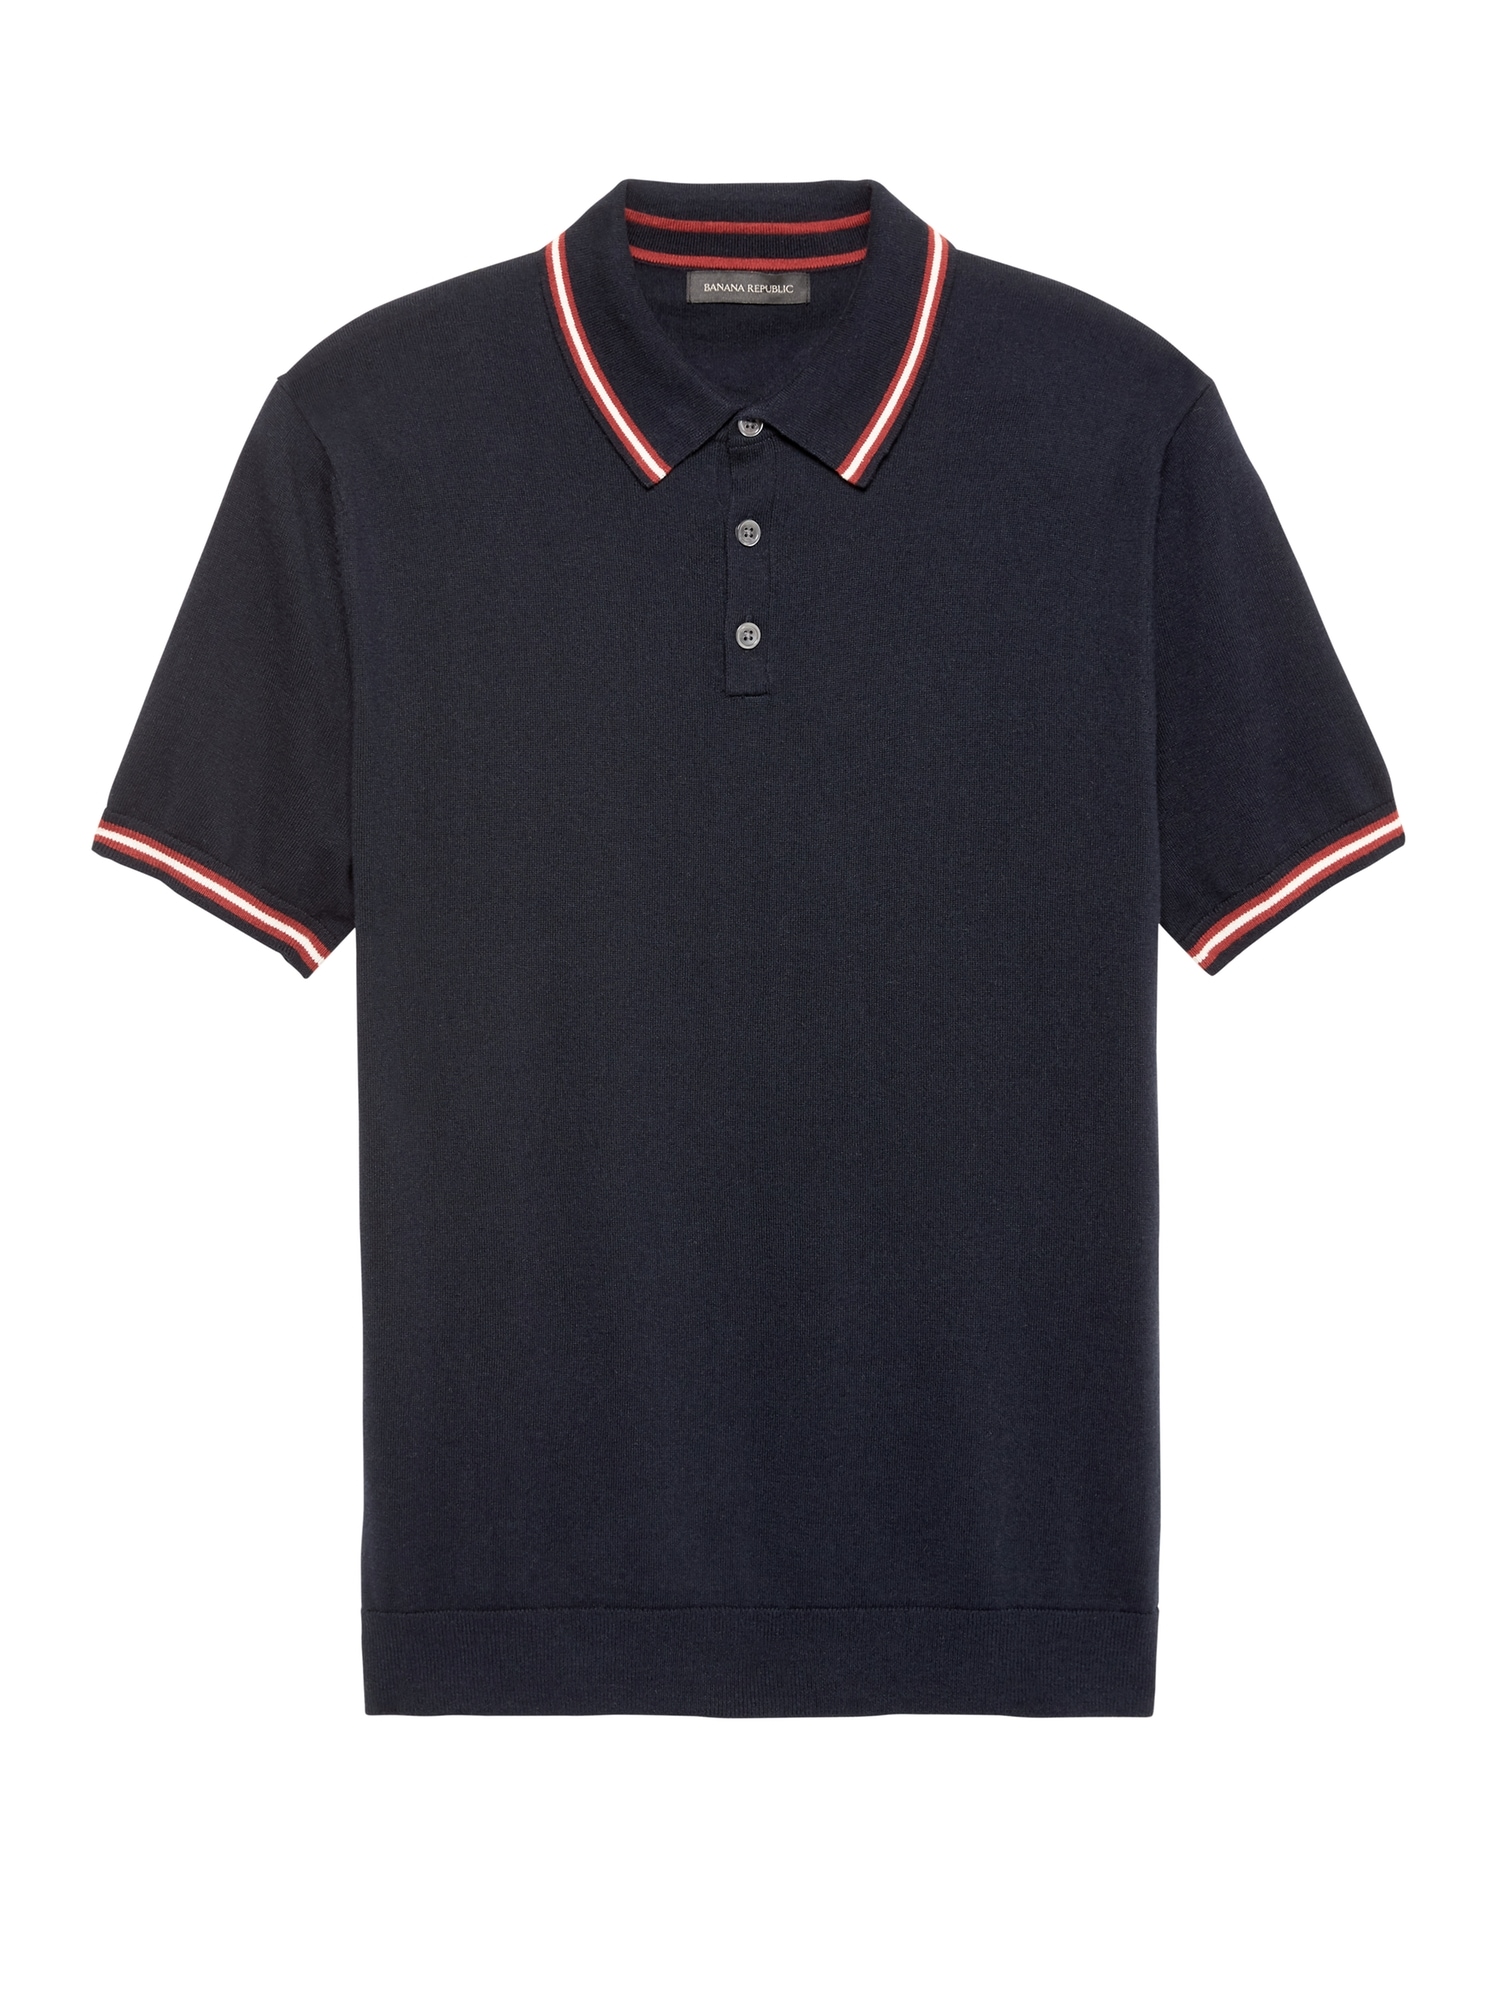 Cashmere And Cotton Blend Short-Sleeved Polo - Luxury Black